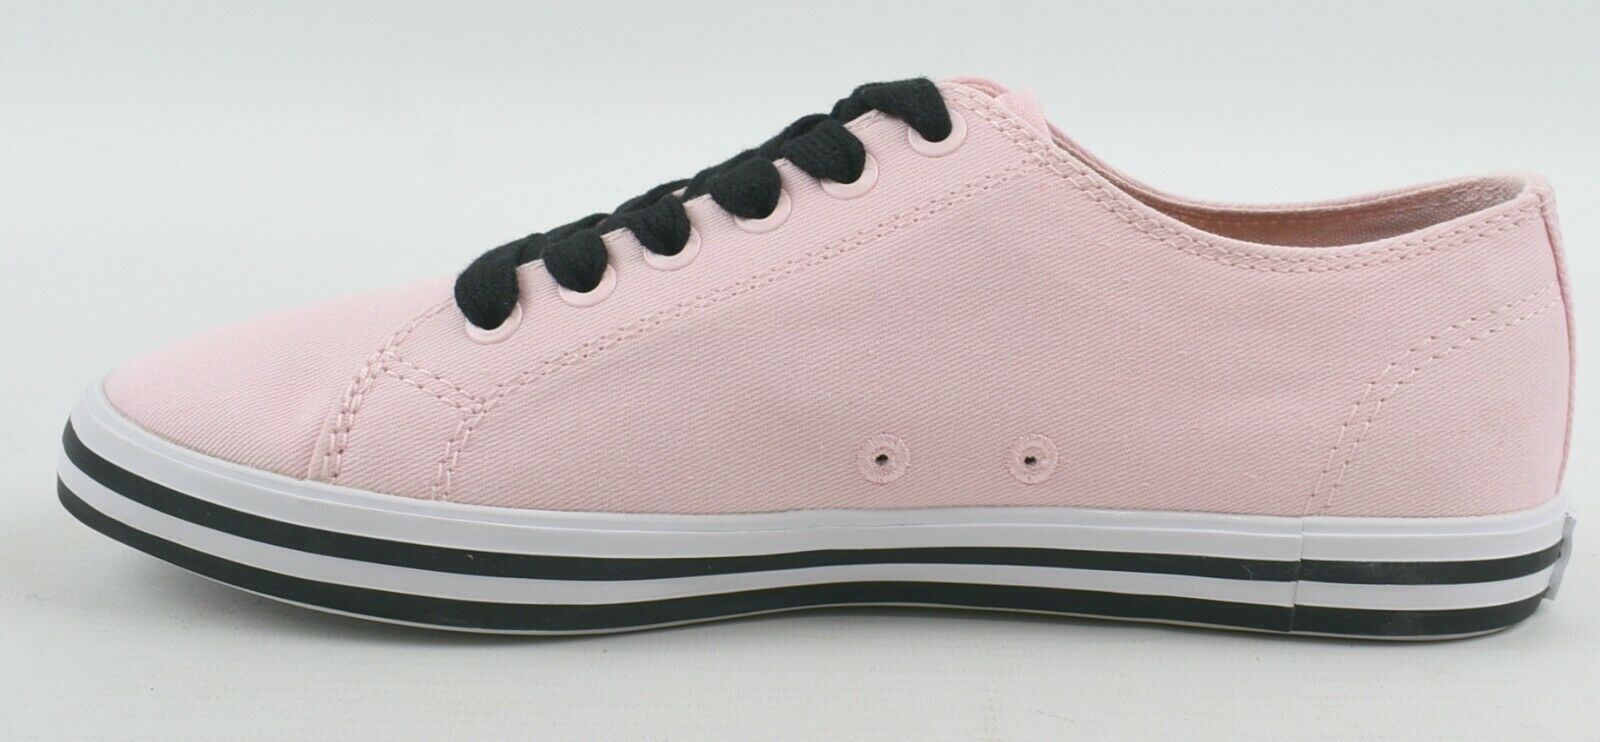 FRED PERRY Women's KINGSTON TWILL Trainers, Iced Pink, size UK 5 /EU 38